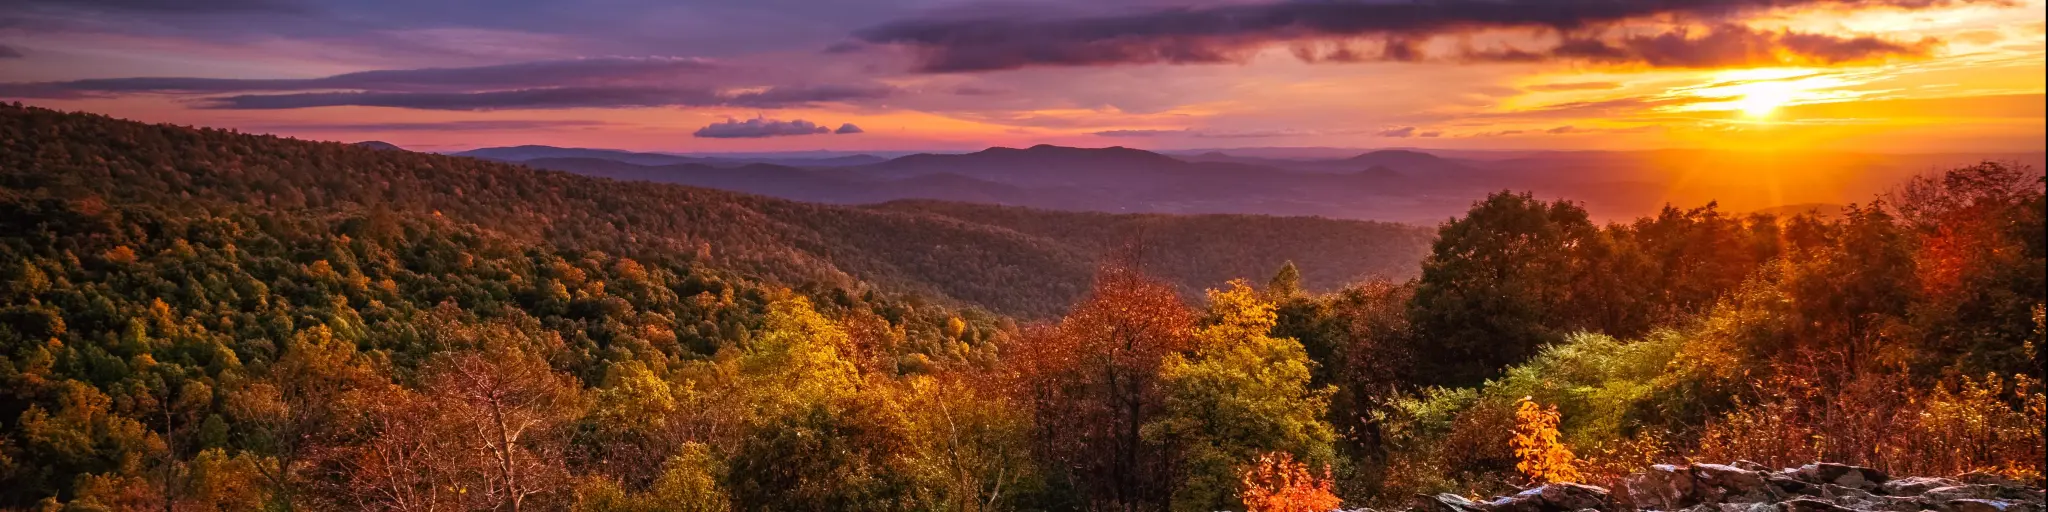 Shenandoah National Park, Virginia at Autumn with a sunset in the distance, rocks in the foreground and overlooking the national park below.